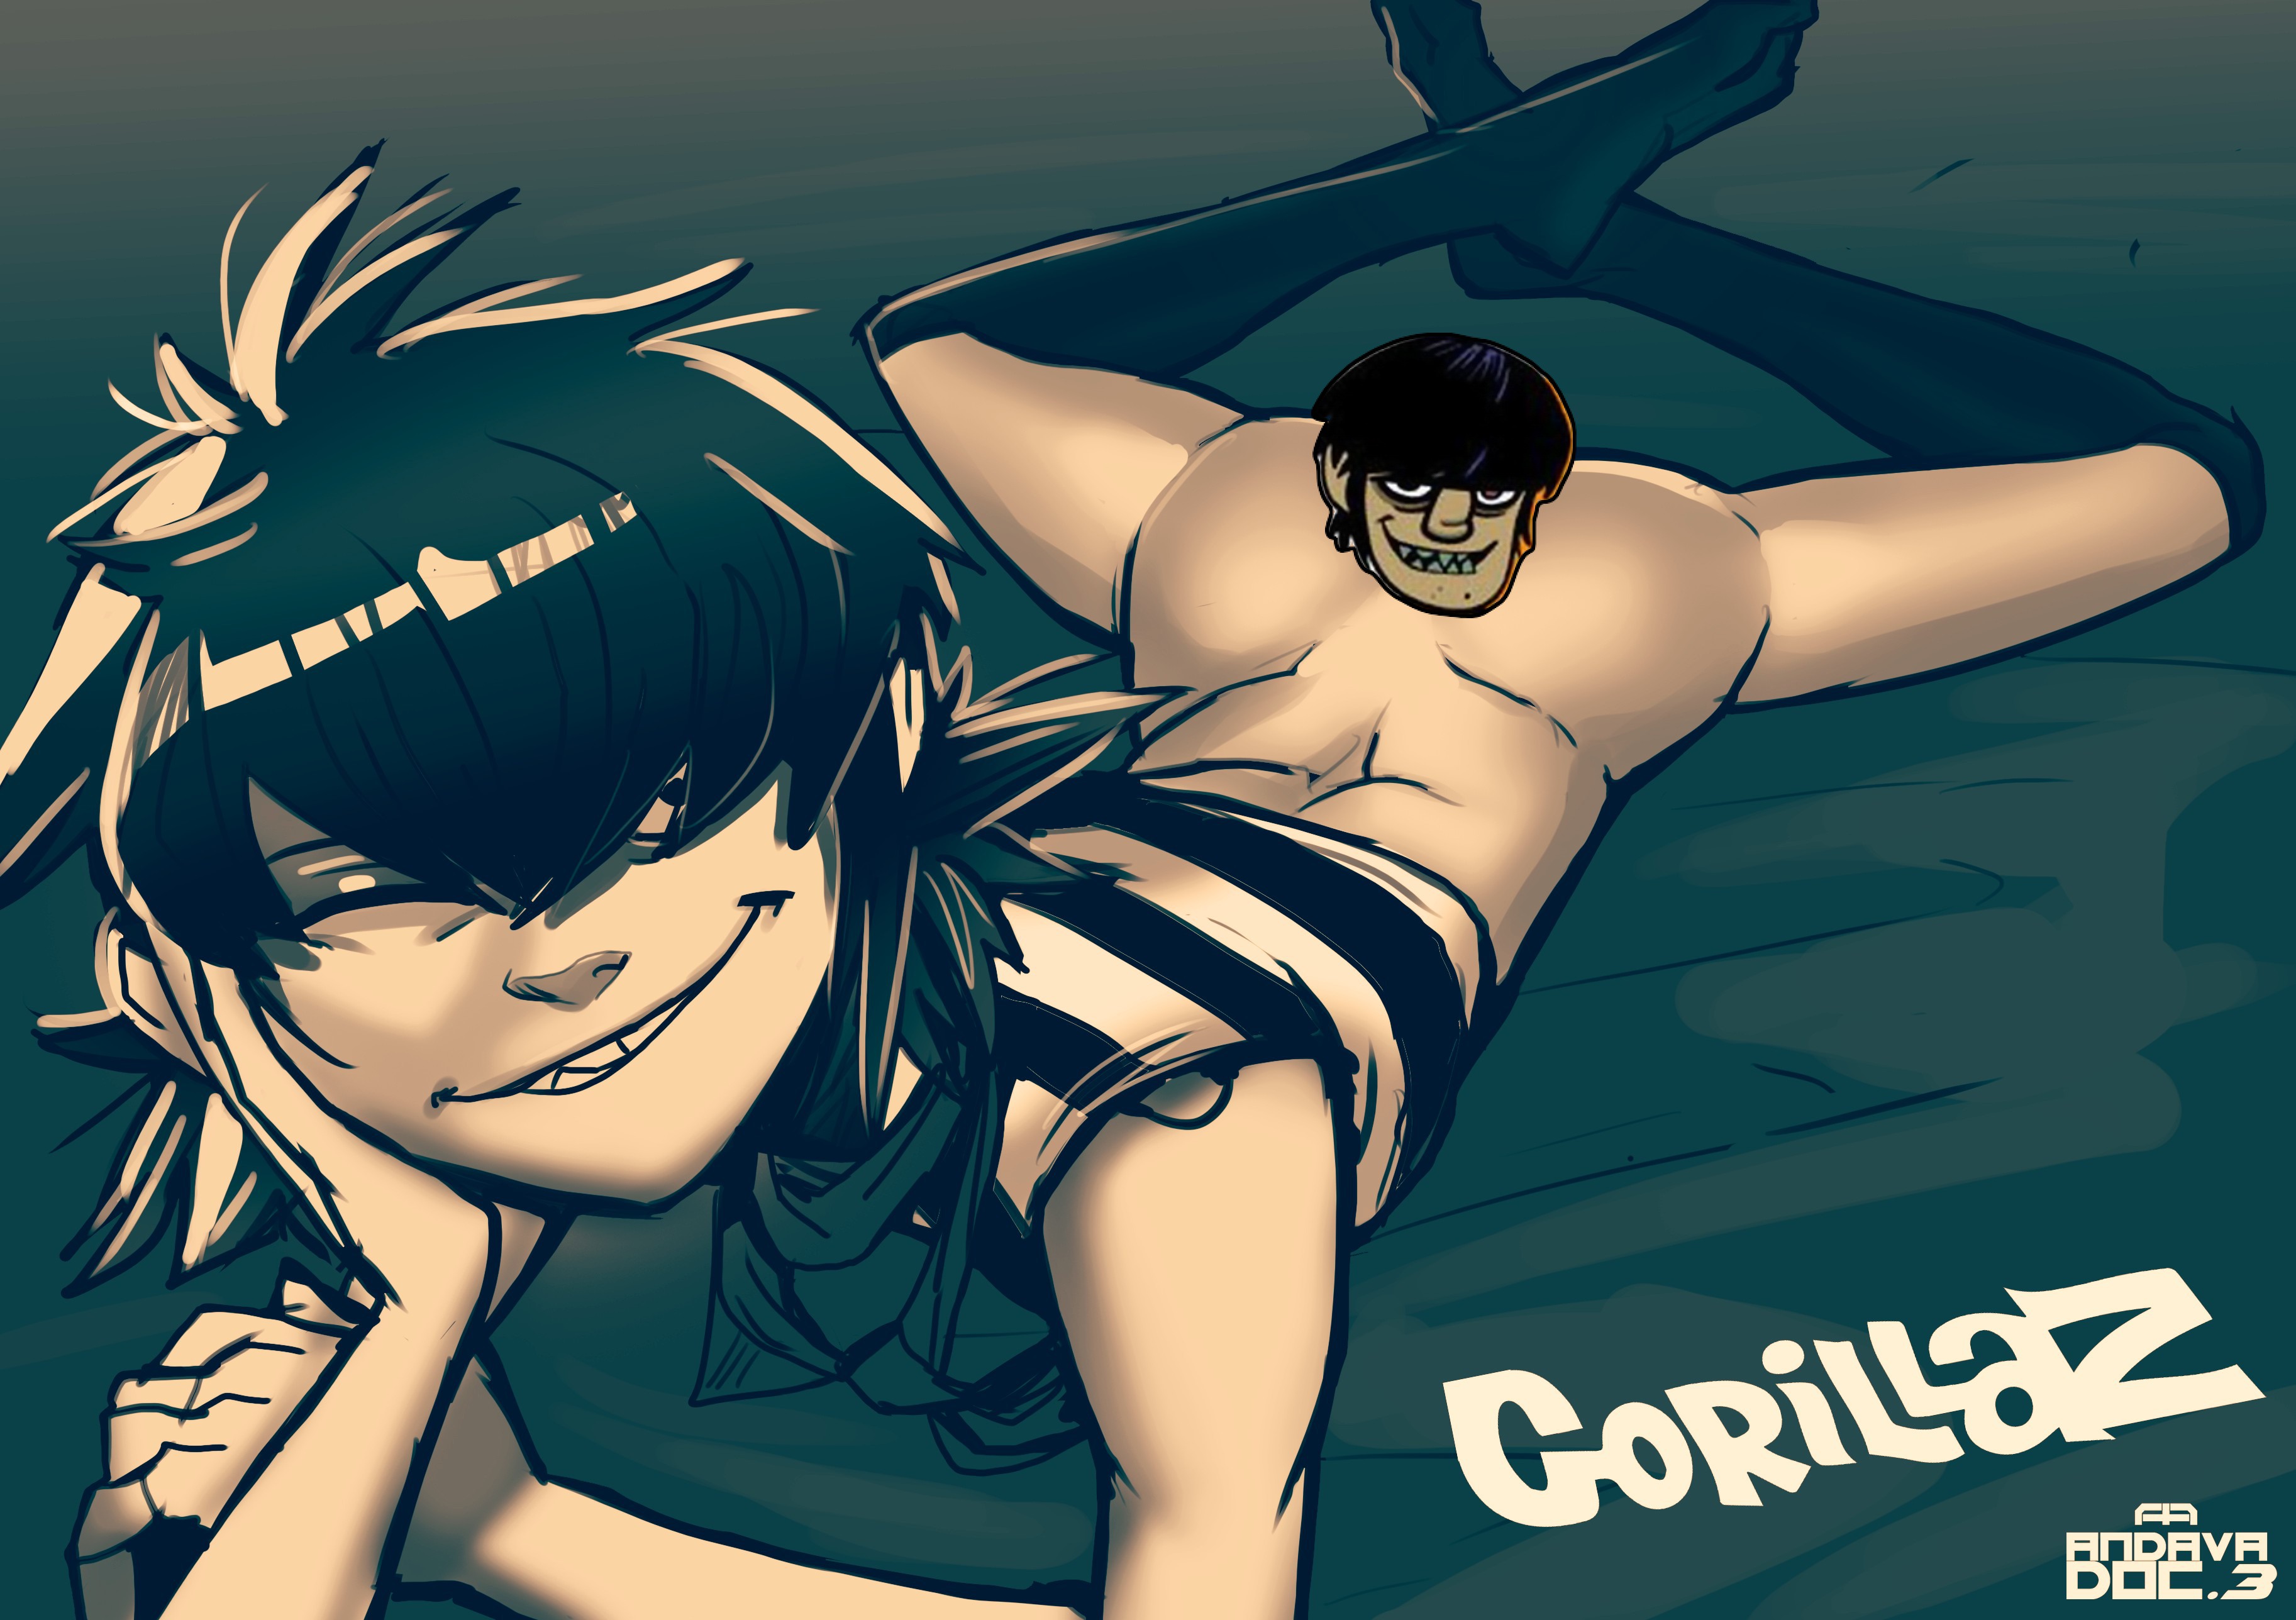 Gorillaz Who Is This Guy And Why Is He Naked.